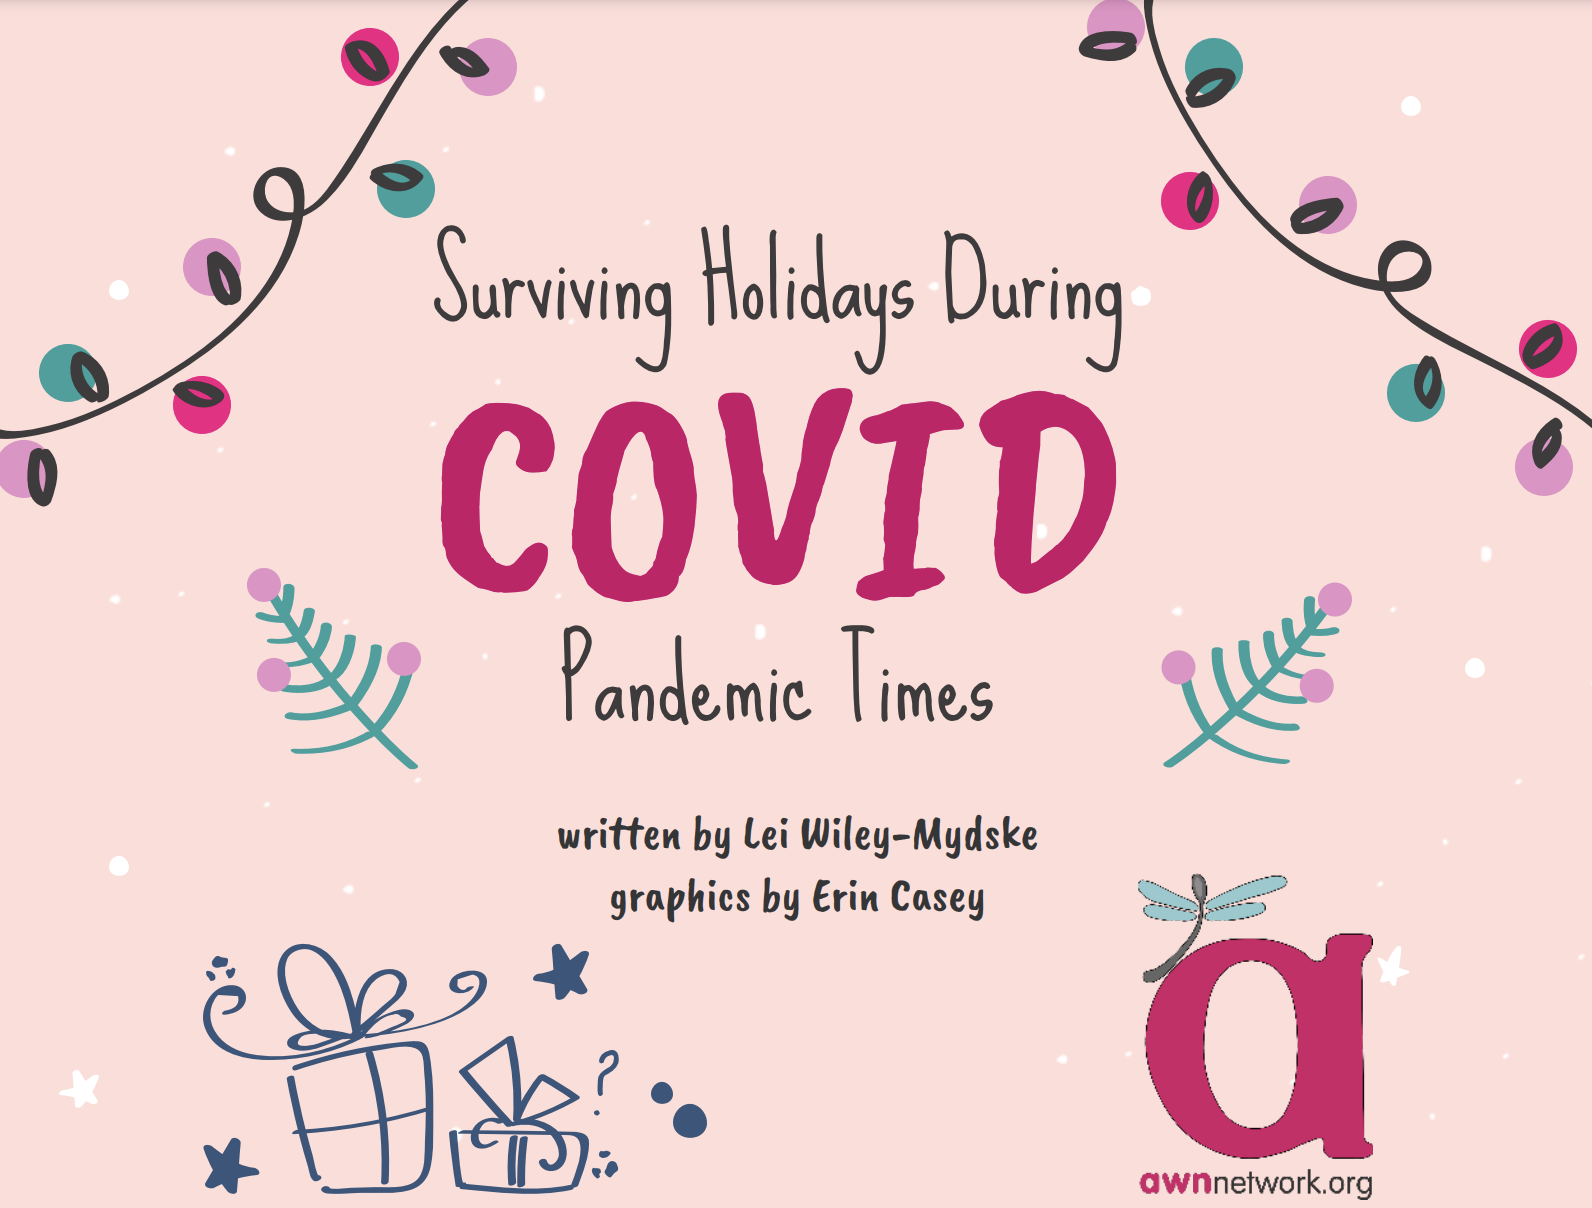 holiday colored lights and decorated pine trees with wrapped presents on pink background. text reads Surviving Holiays During COVID Pandemic Times written by Lei Wiley-Mydske graphics by Erin Casey